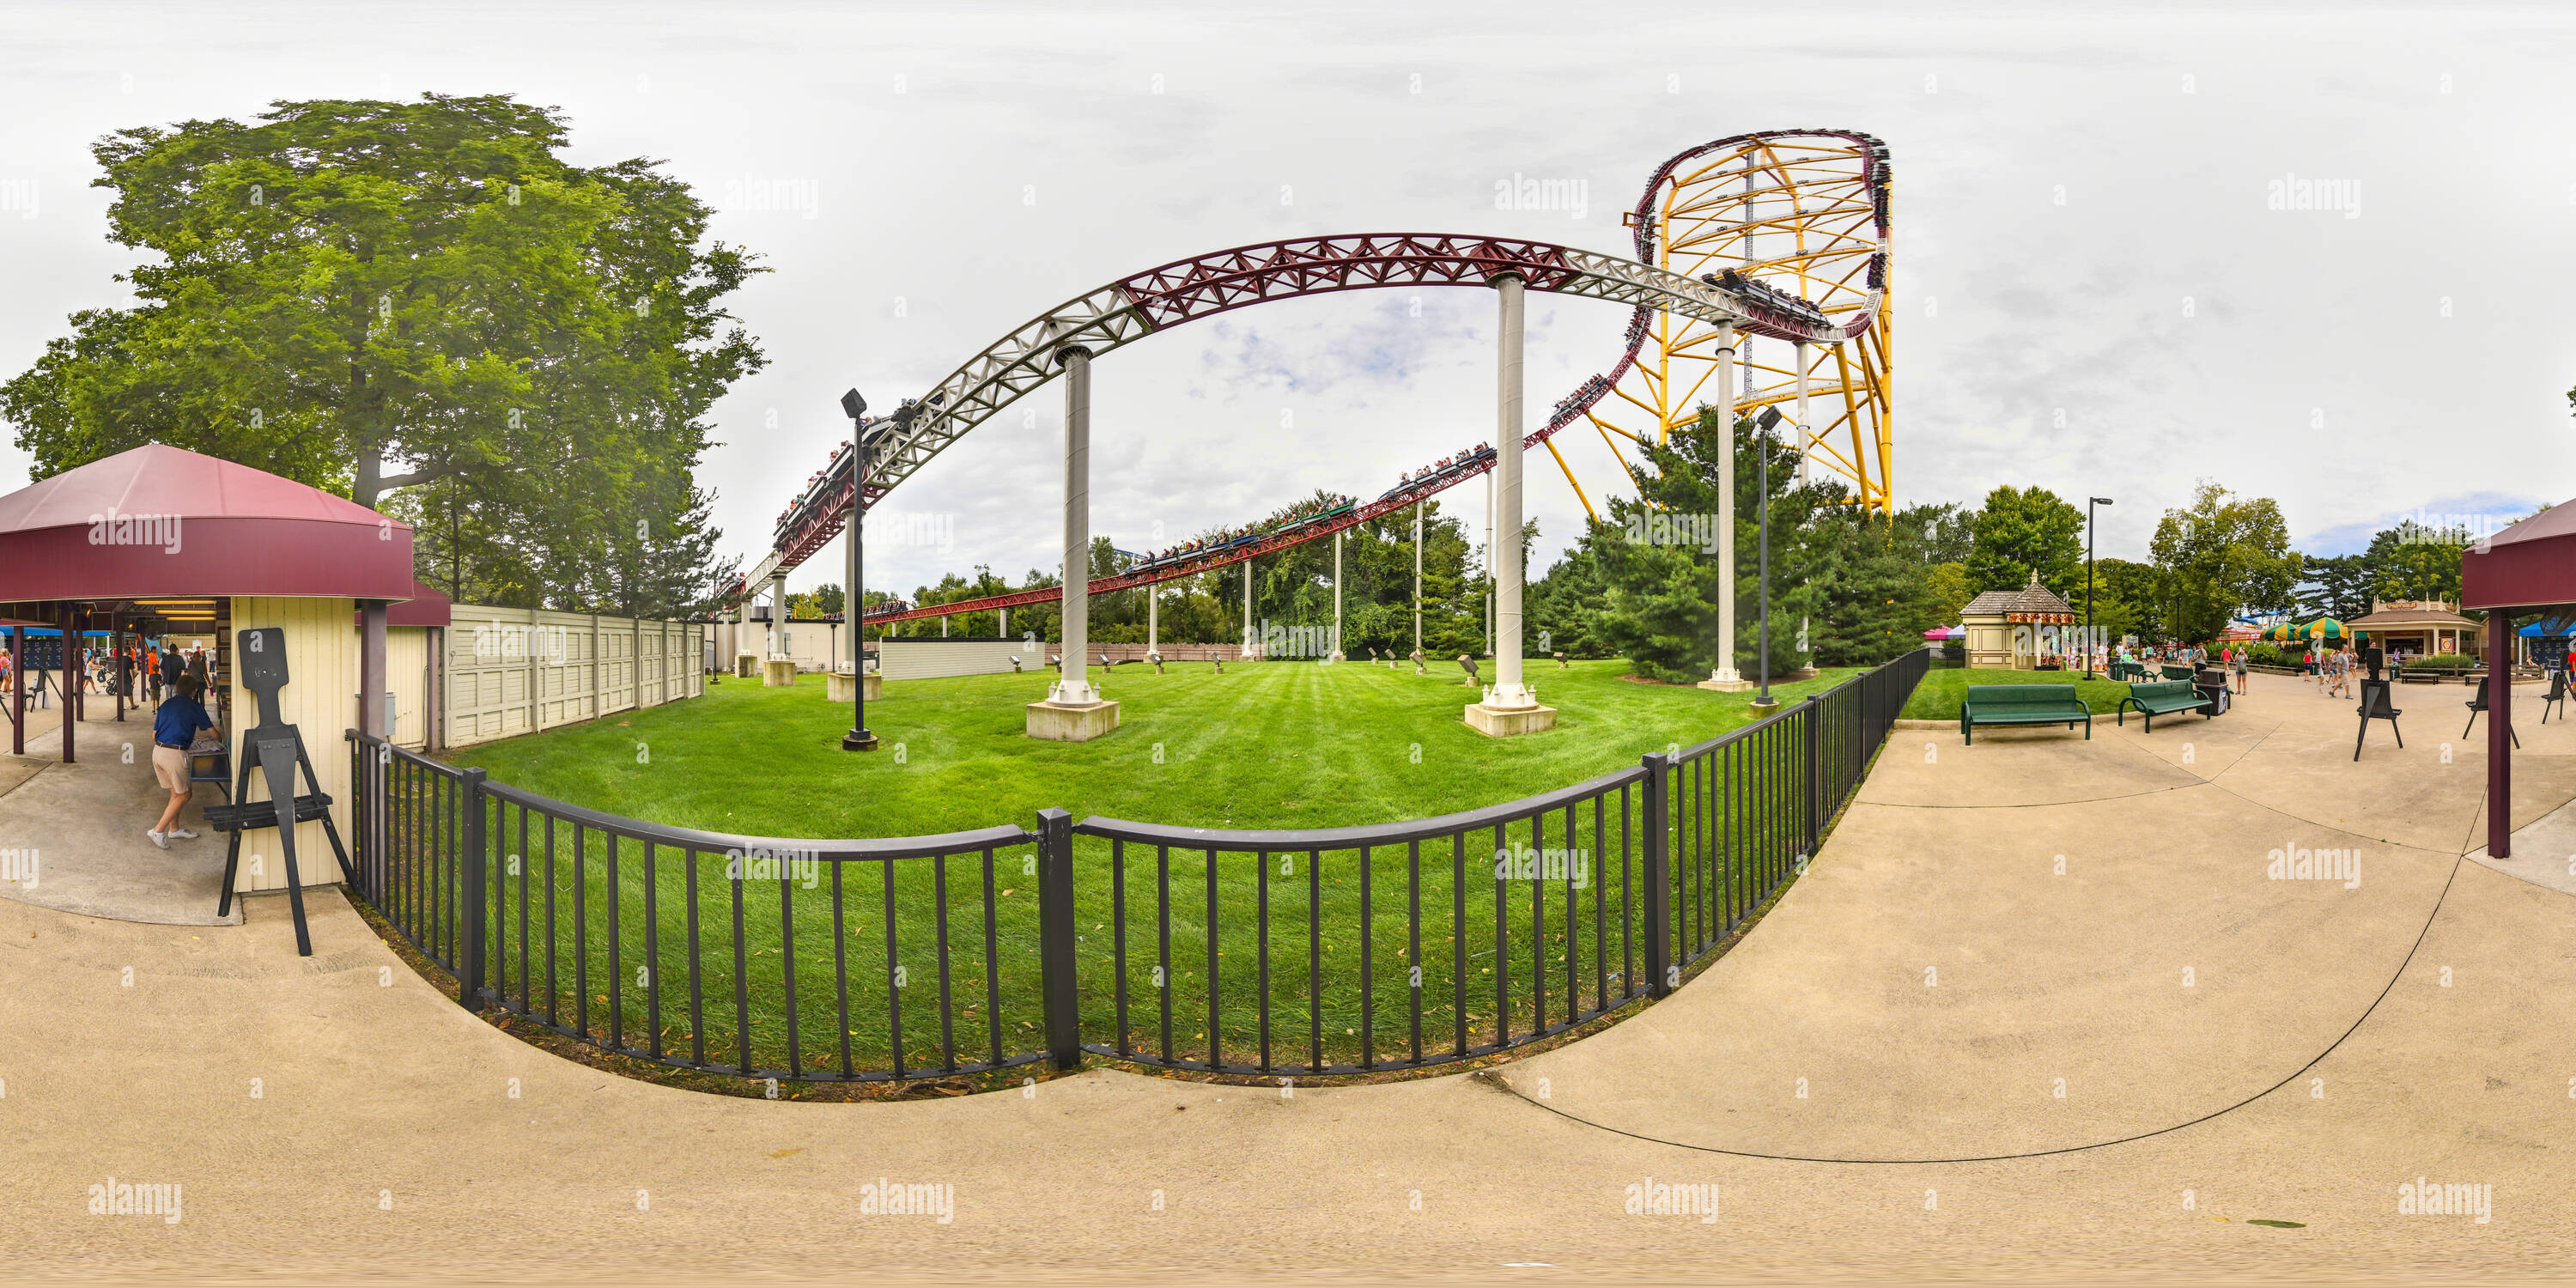 360 degree panoramic view of Top Thrill Dragster at Cedar Point